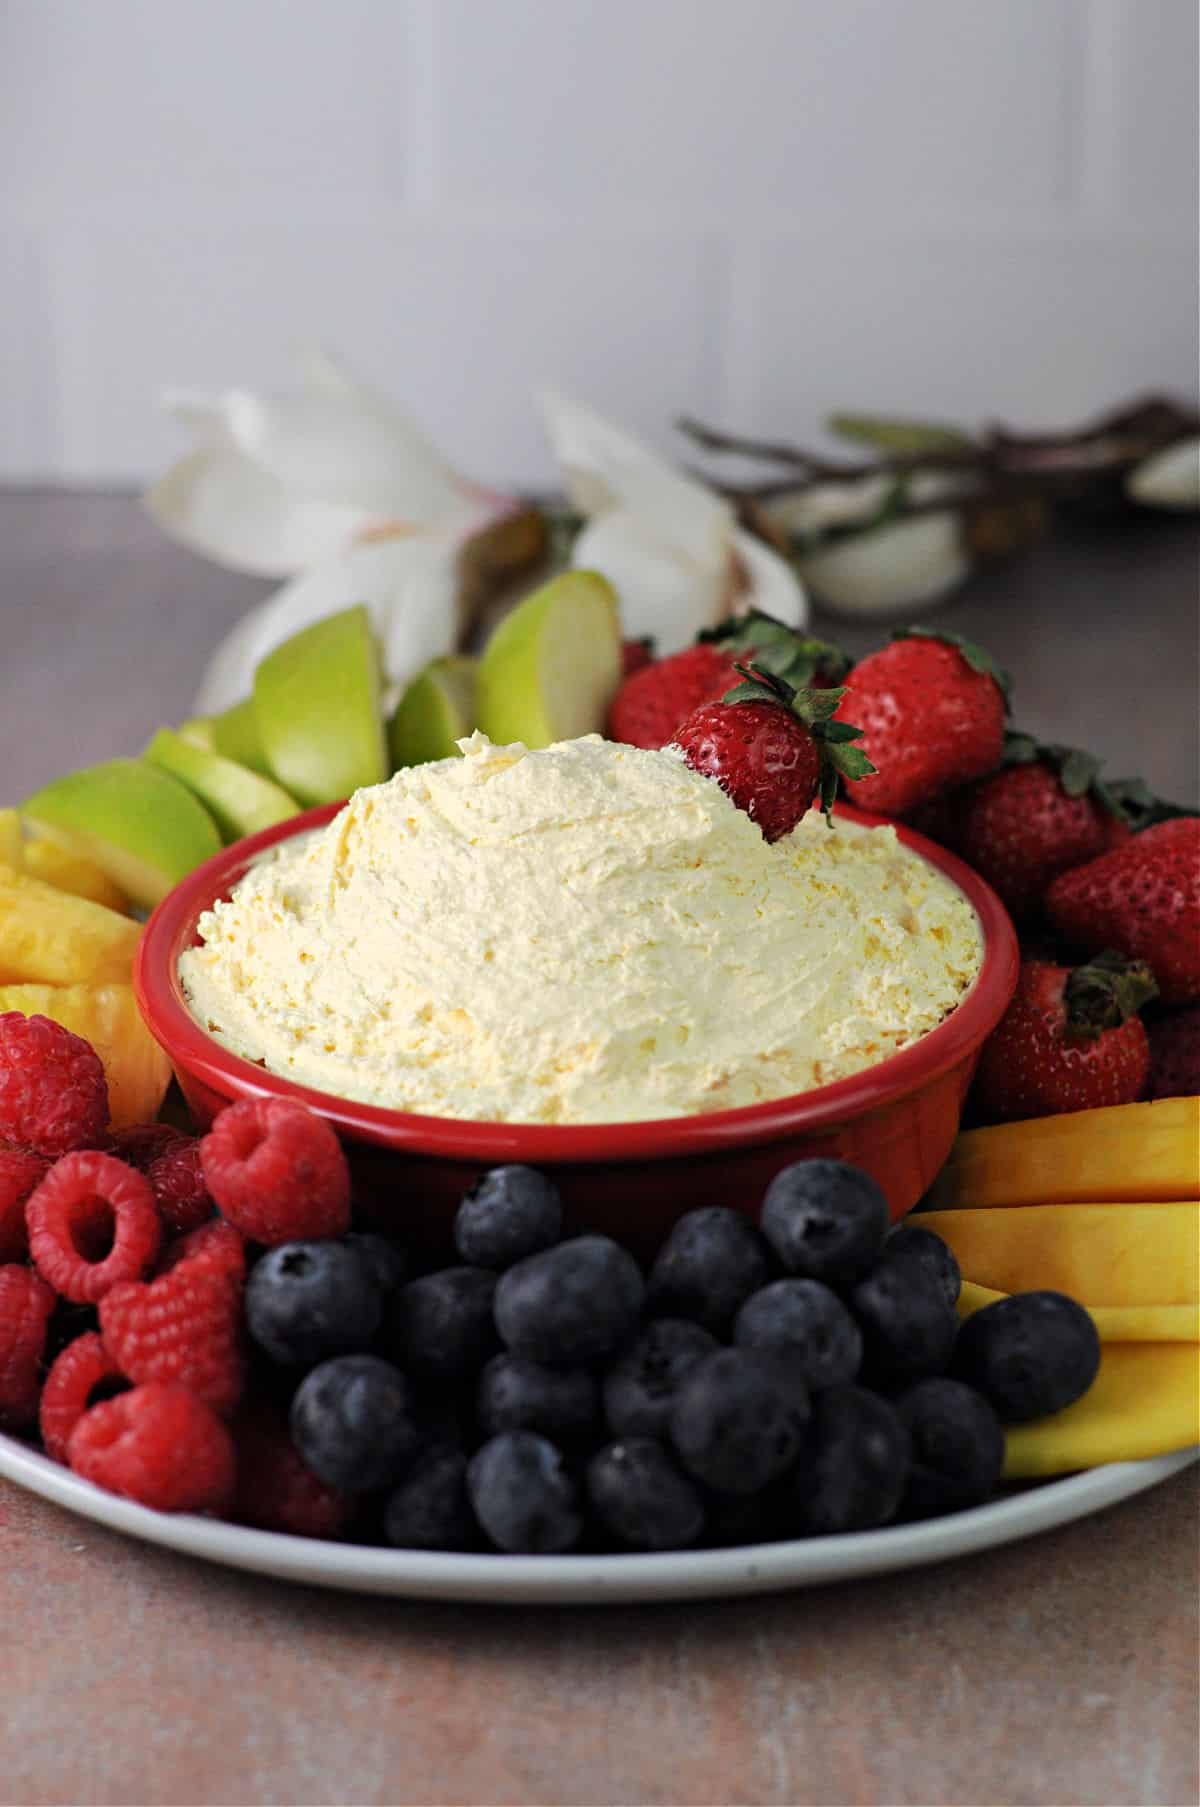 Cool Whip dip surrounded by fruit.